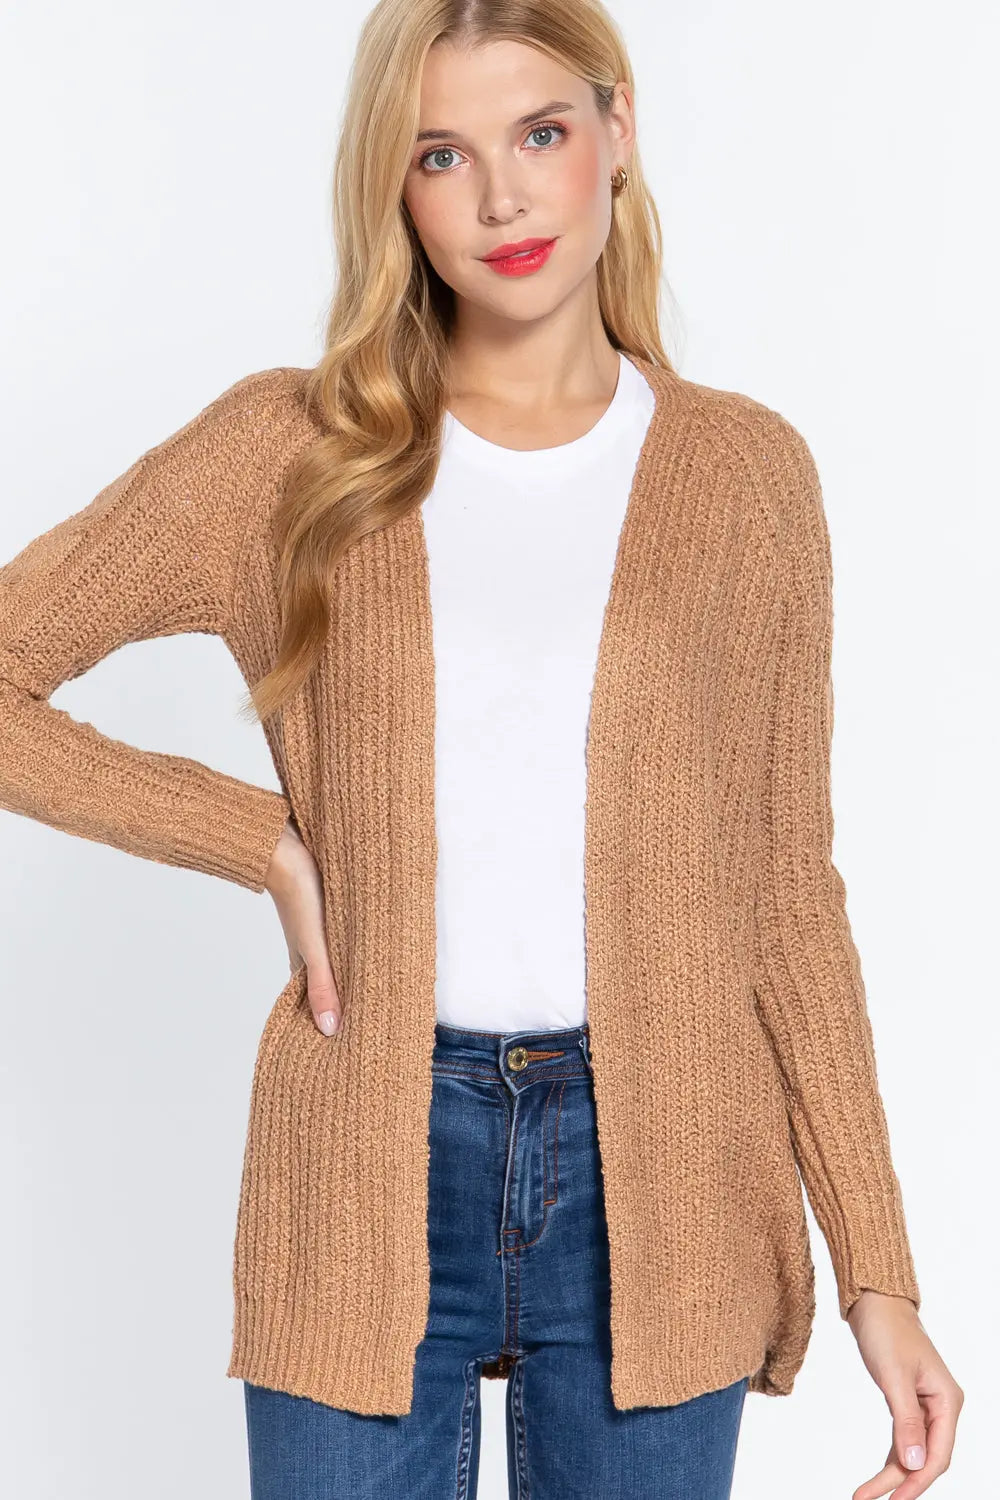 Long Slv Open Front Sweater Cardigan Sunny EvE Fashion